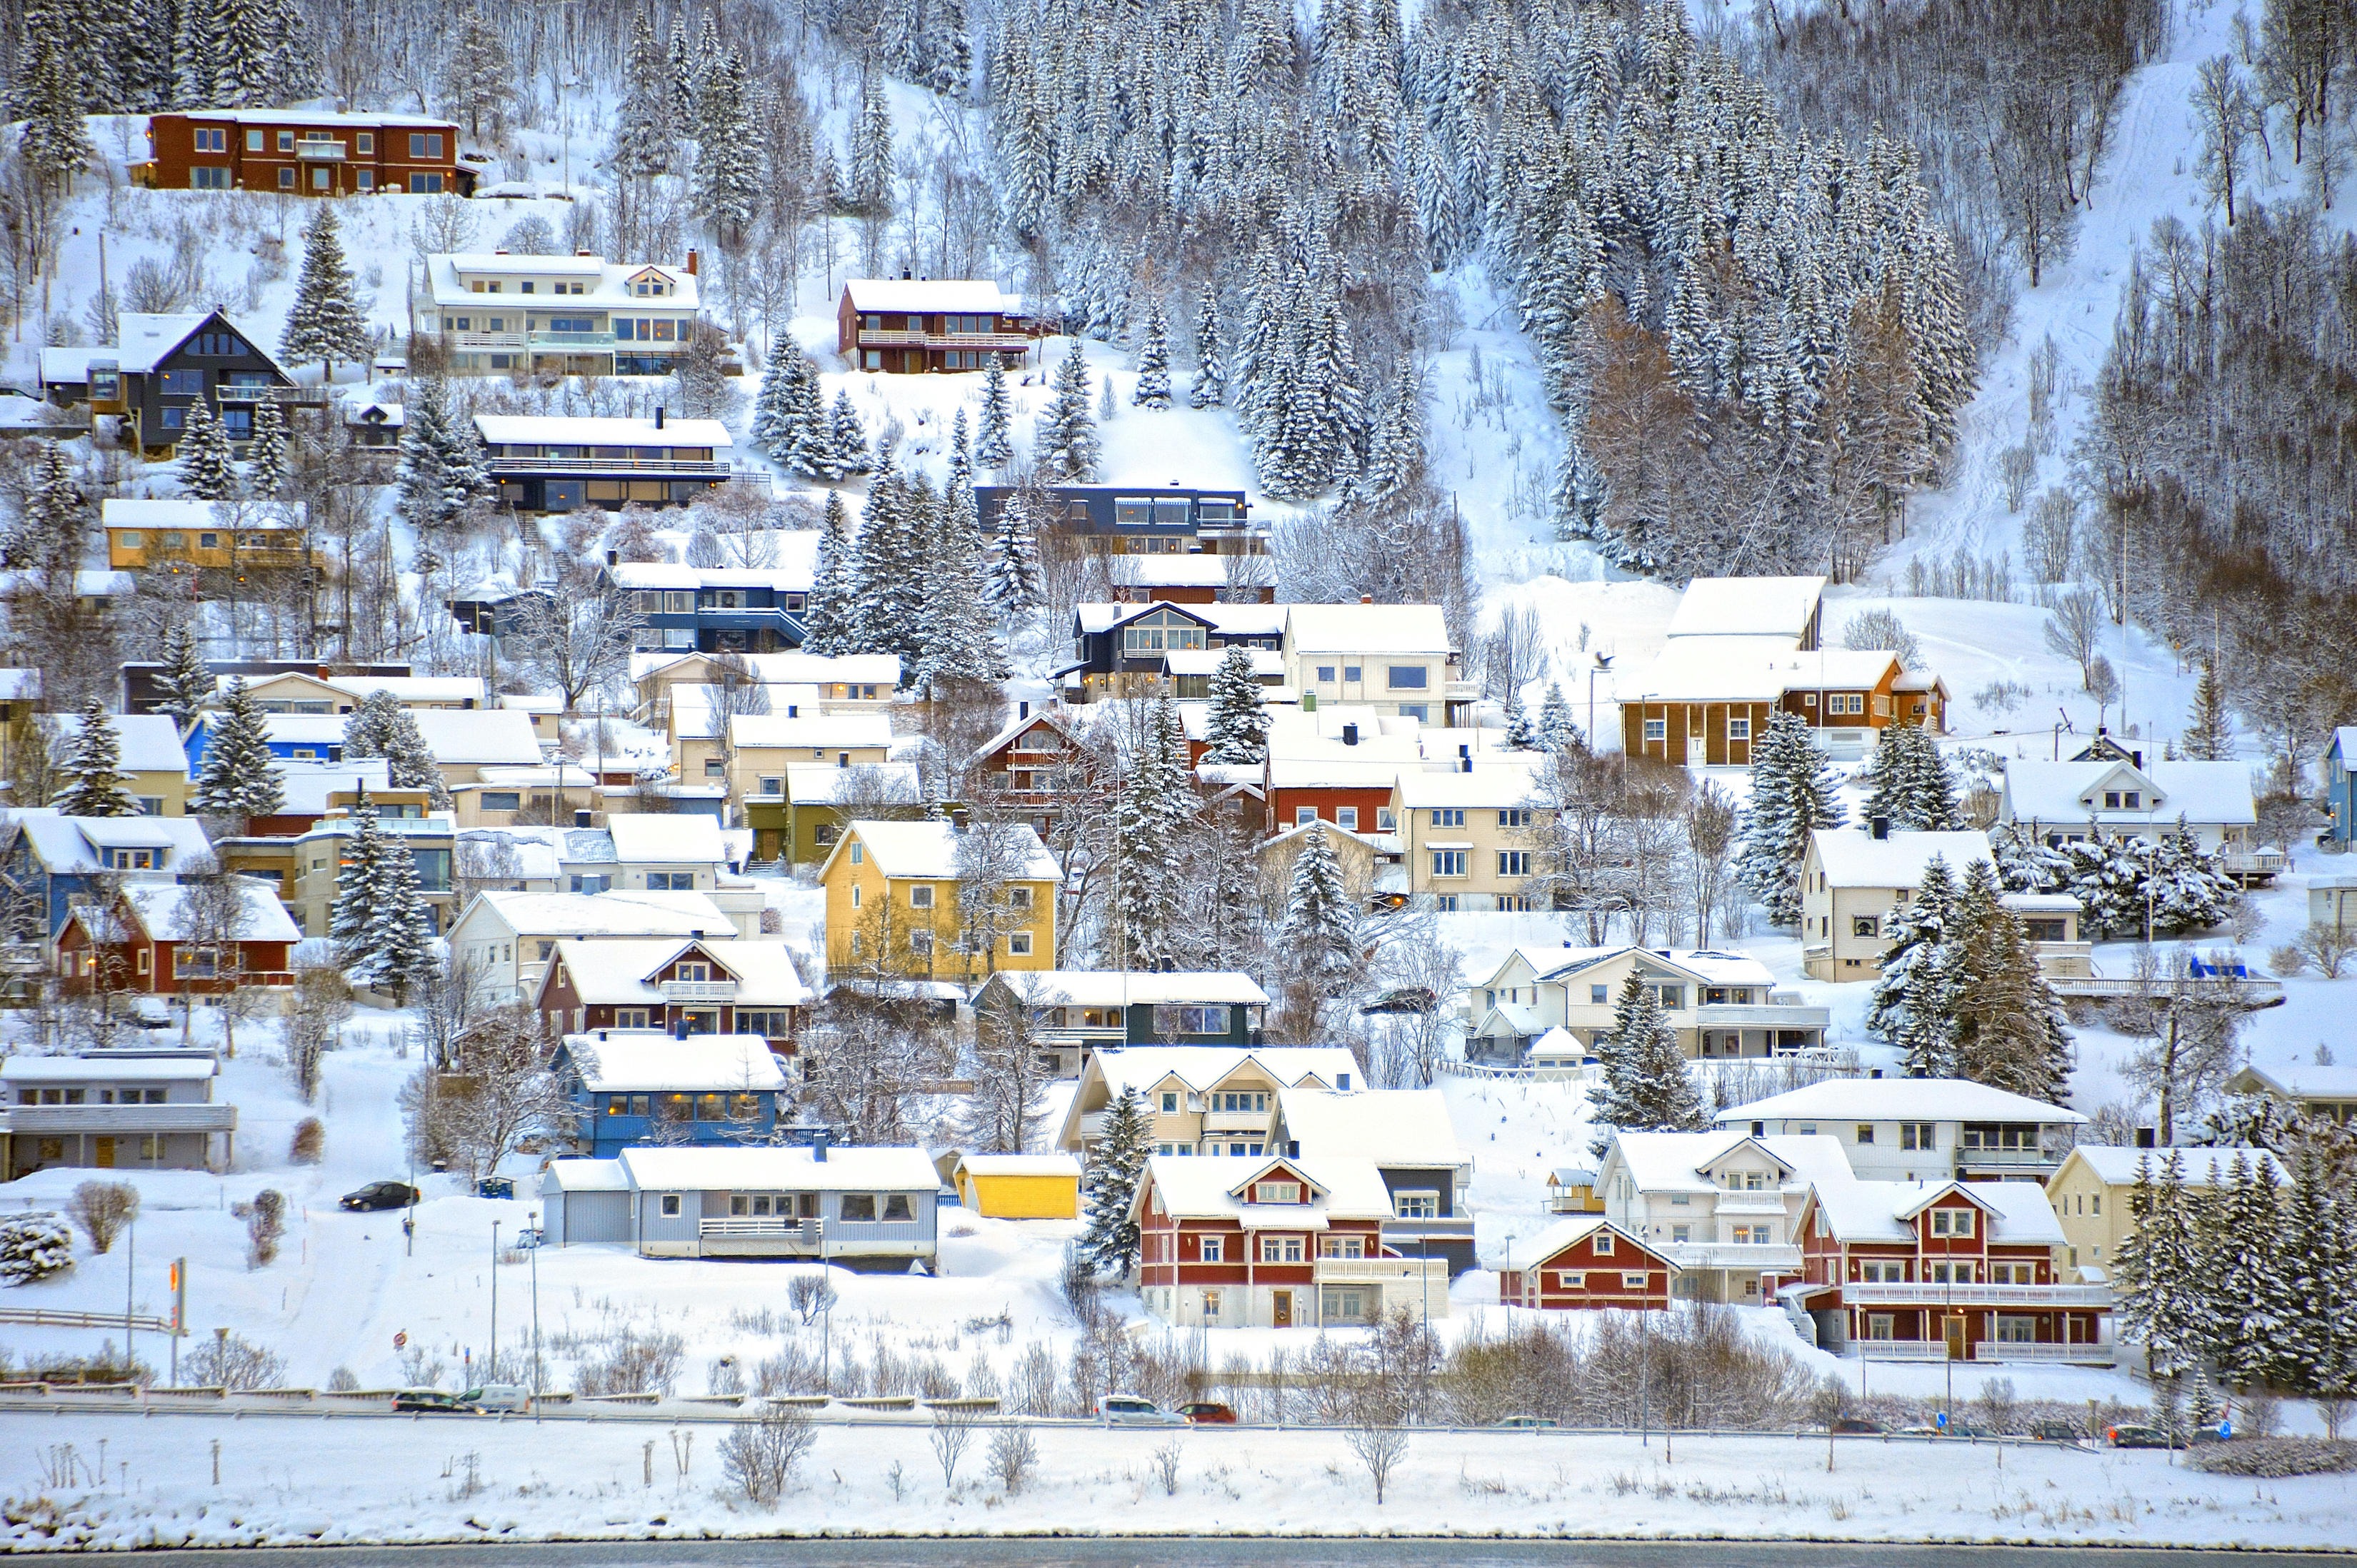 Picture of snowy houses oh a hillside in Tromso, Norway.